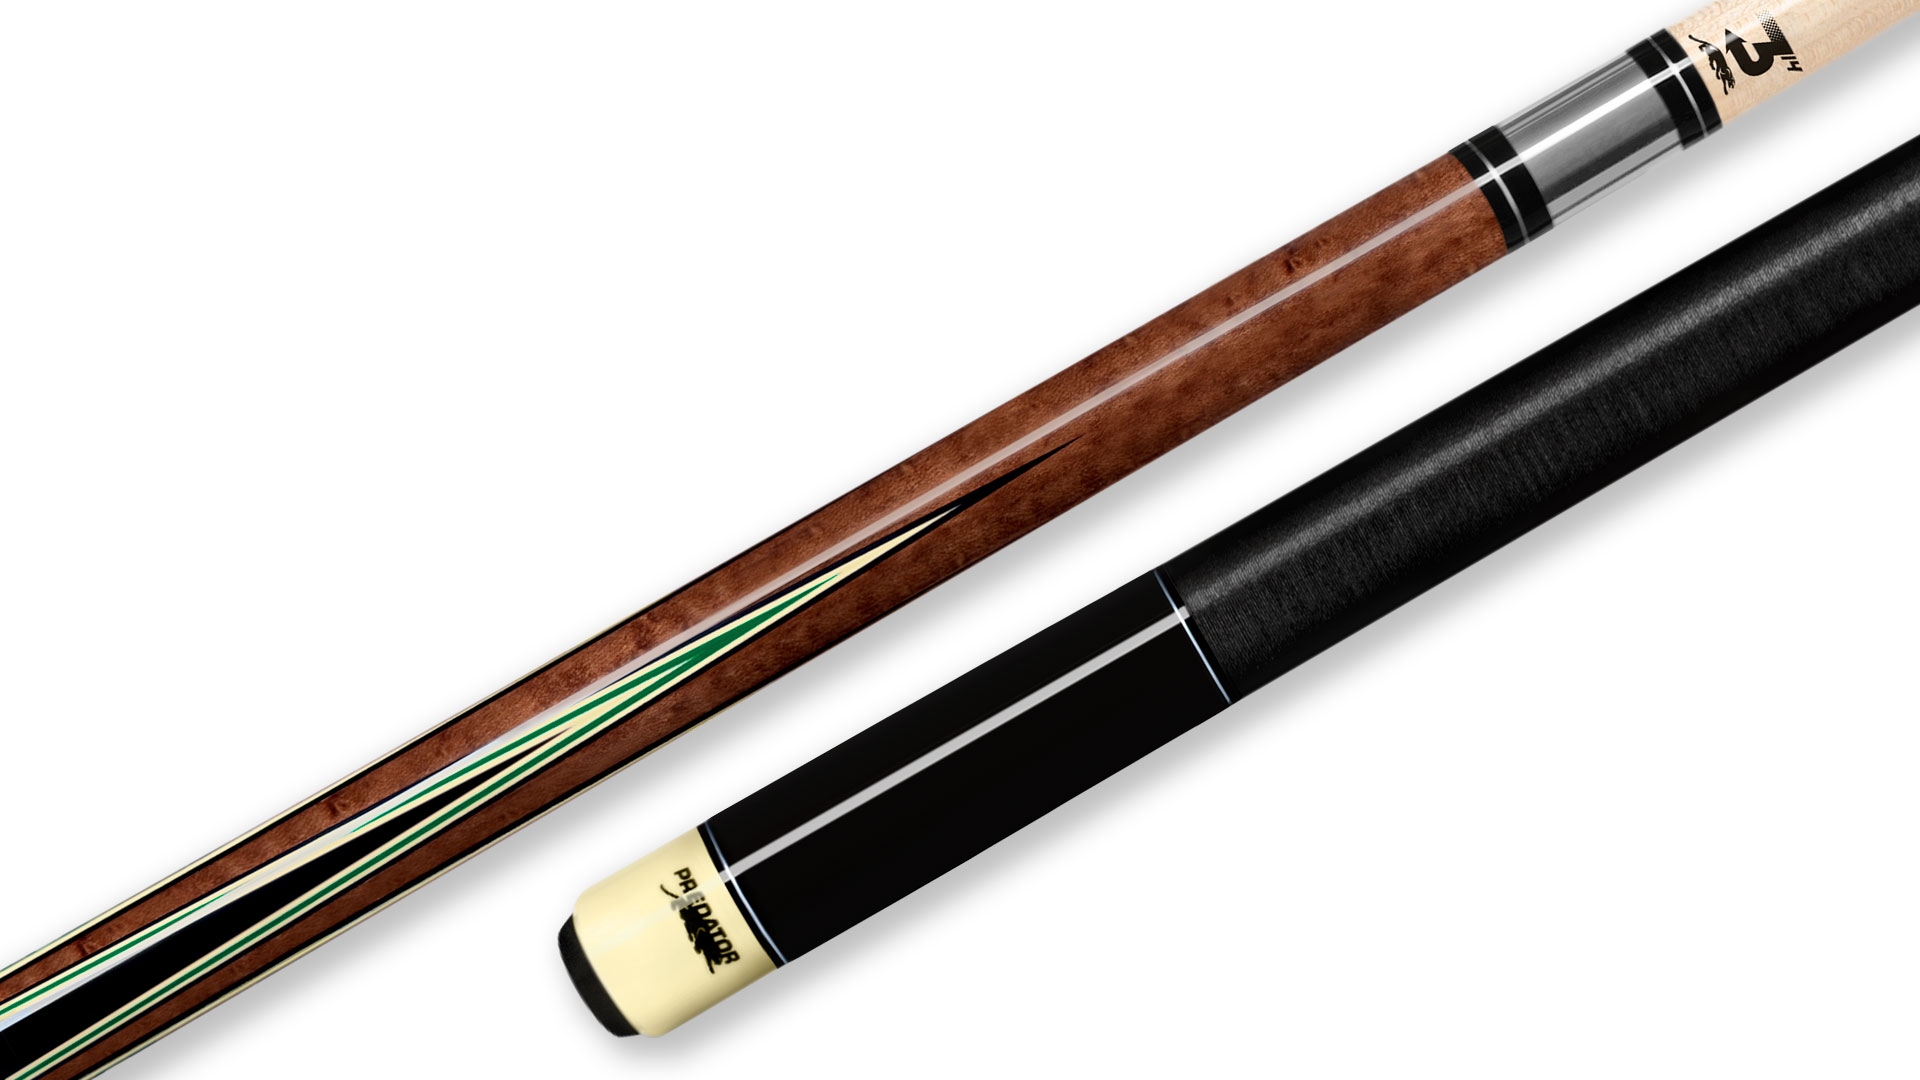 Change Your Game! Pool Cue 13 MM Tip Irish Linen Wrap Buy Now Get Free Shipping 